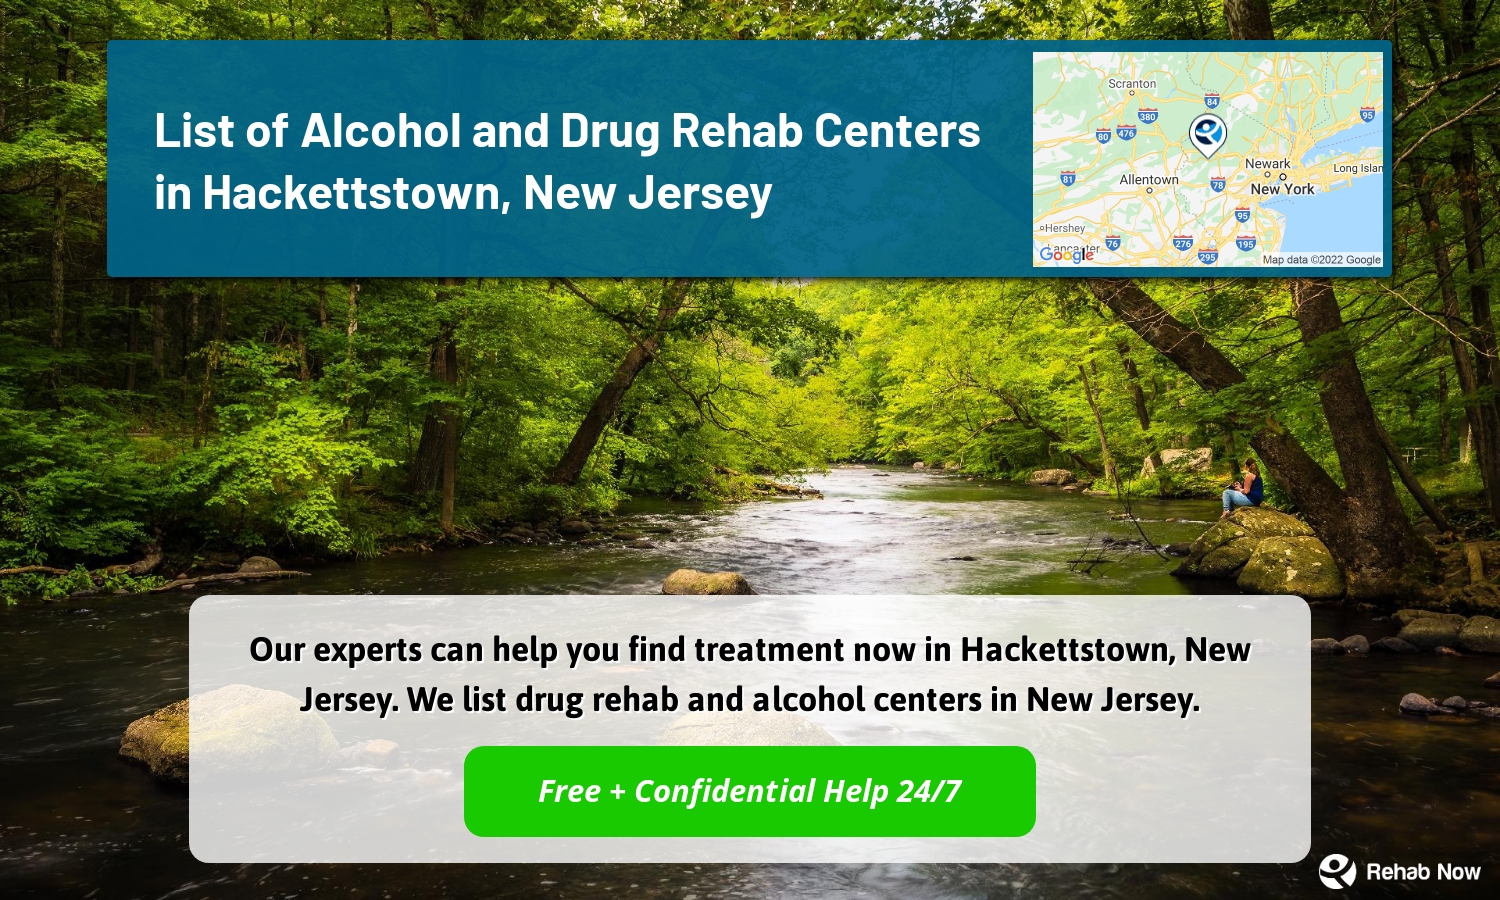 Our experts can help you find treatment now in Hackettstown, New Jersey. We list drug rehab and alcohol centers in New Jersey.